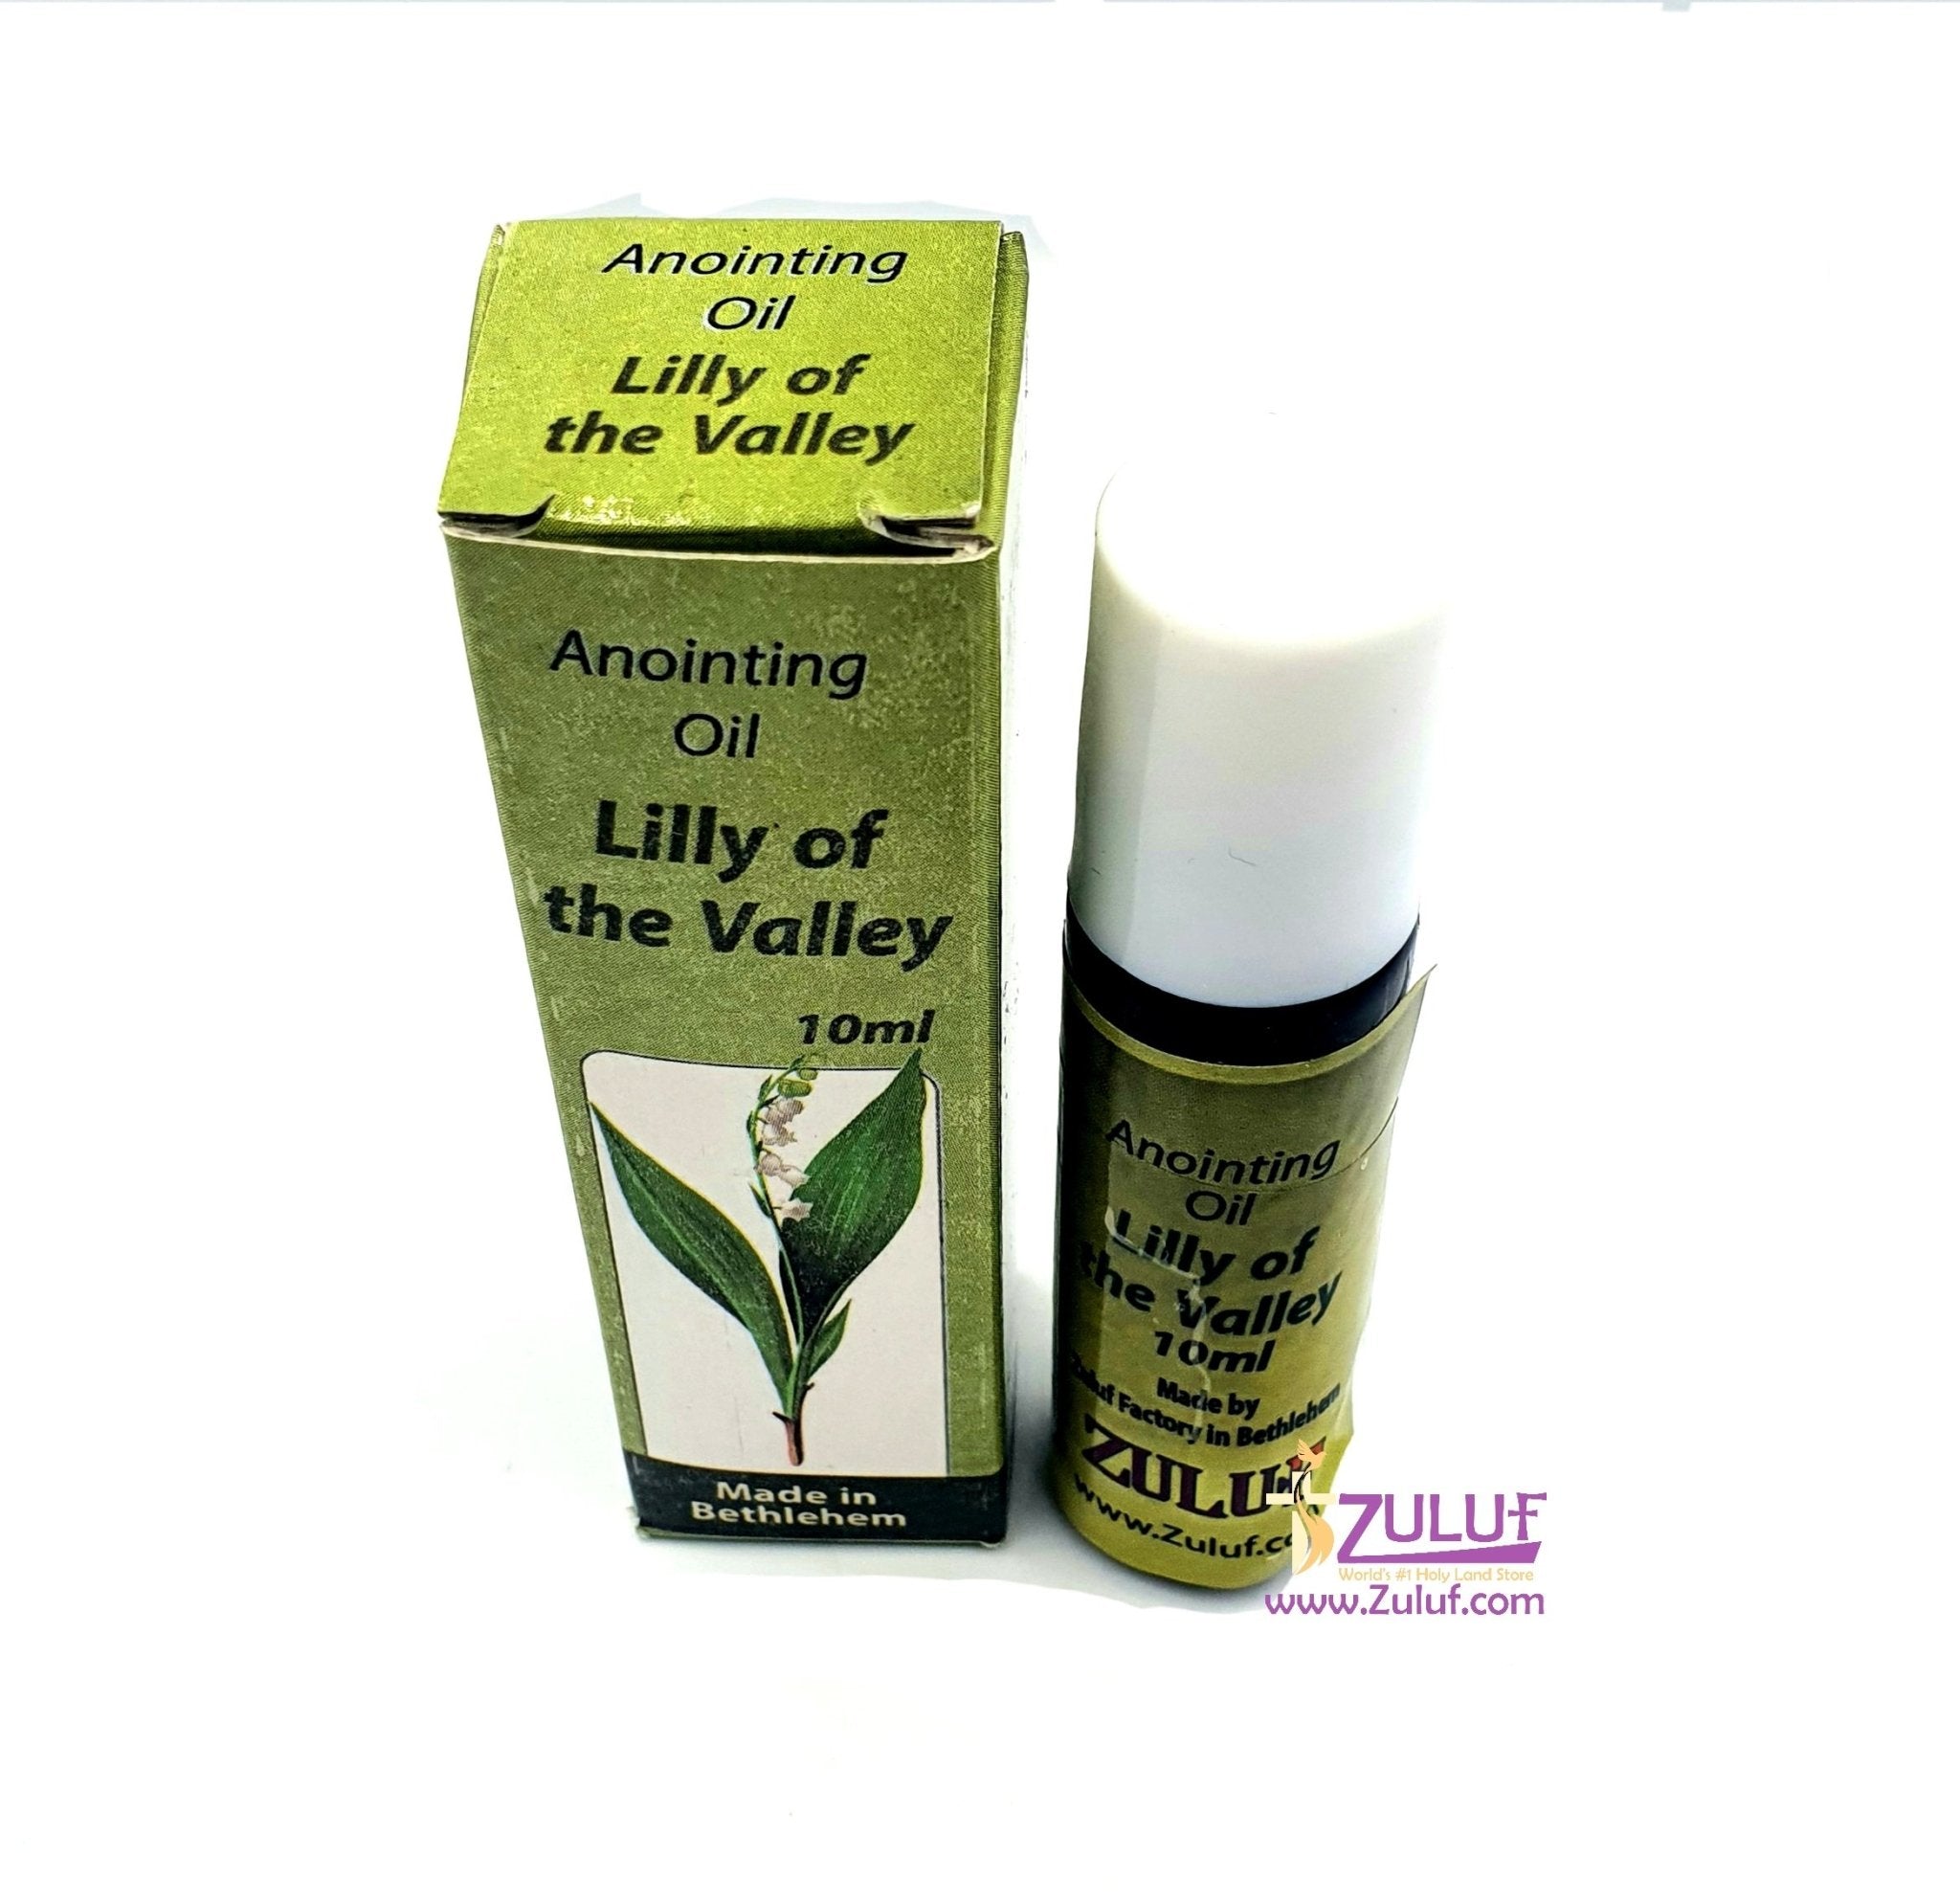 Lilly of the Valley Anointing Oil Zuluf - PER008 - Zuluf